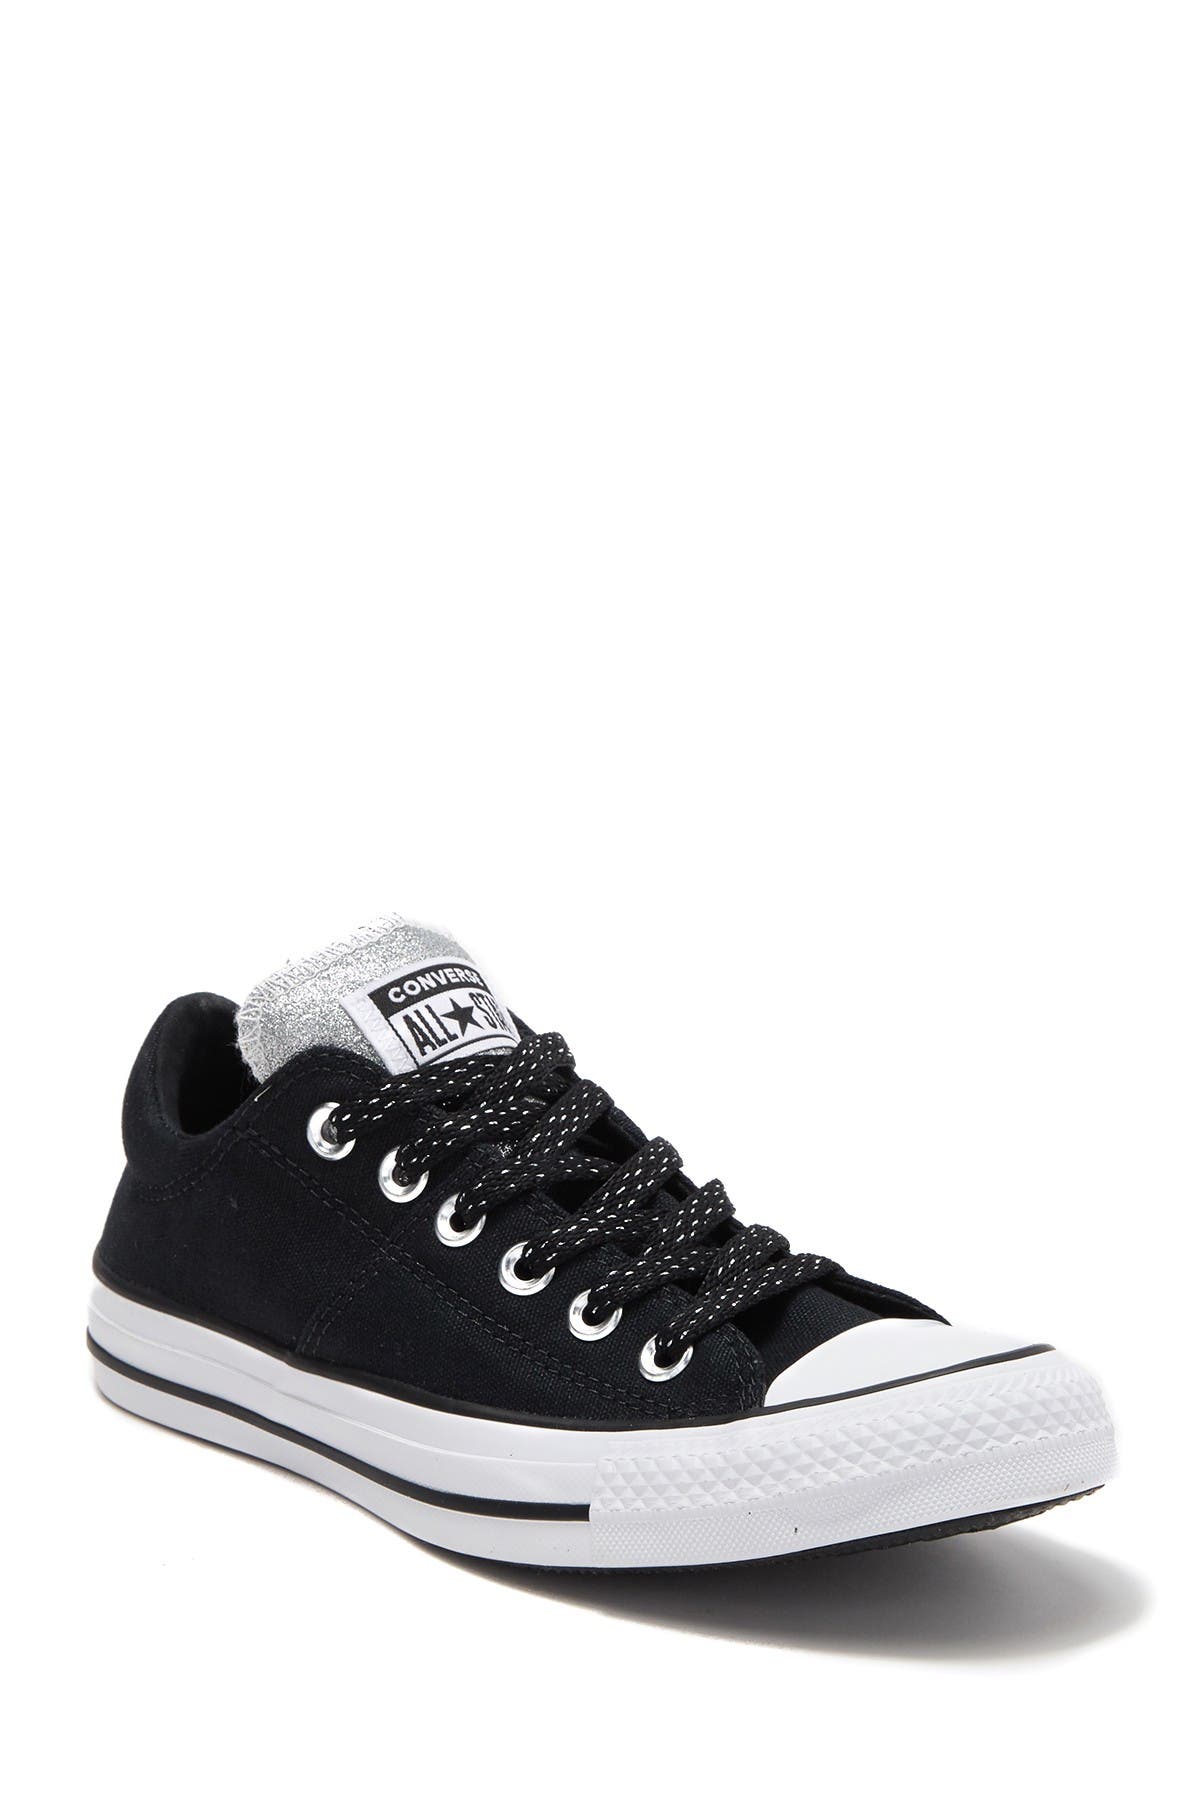 women's converse chuck taylor all star madison sneakers